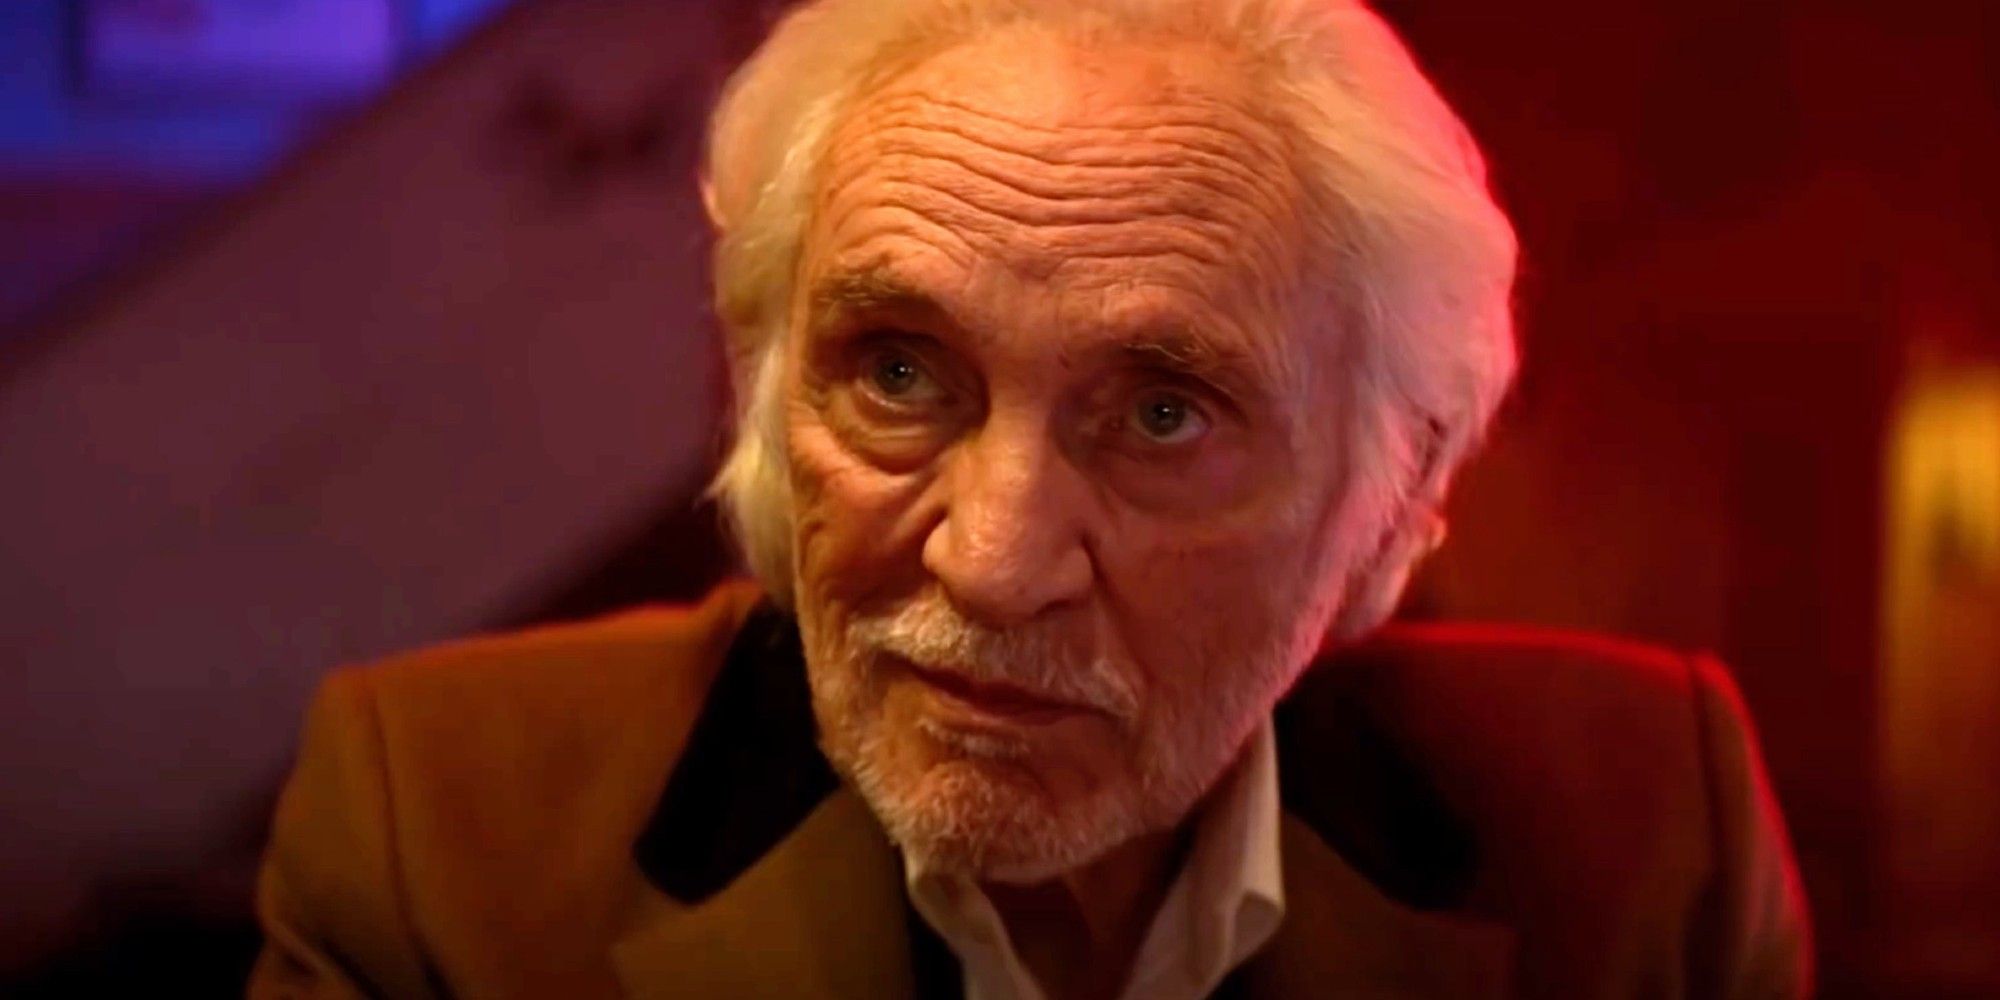 Terence Stamp as Lindsey in Last Night in Soho